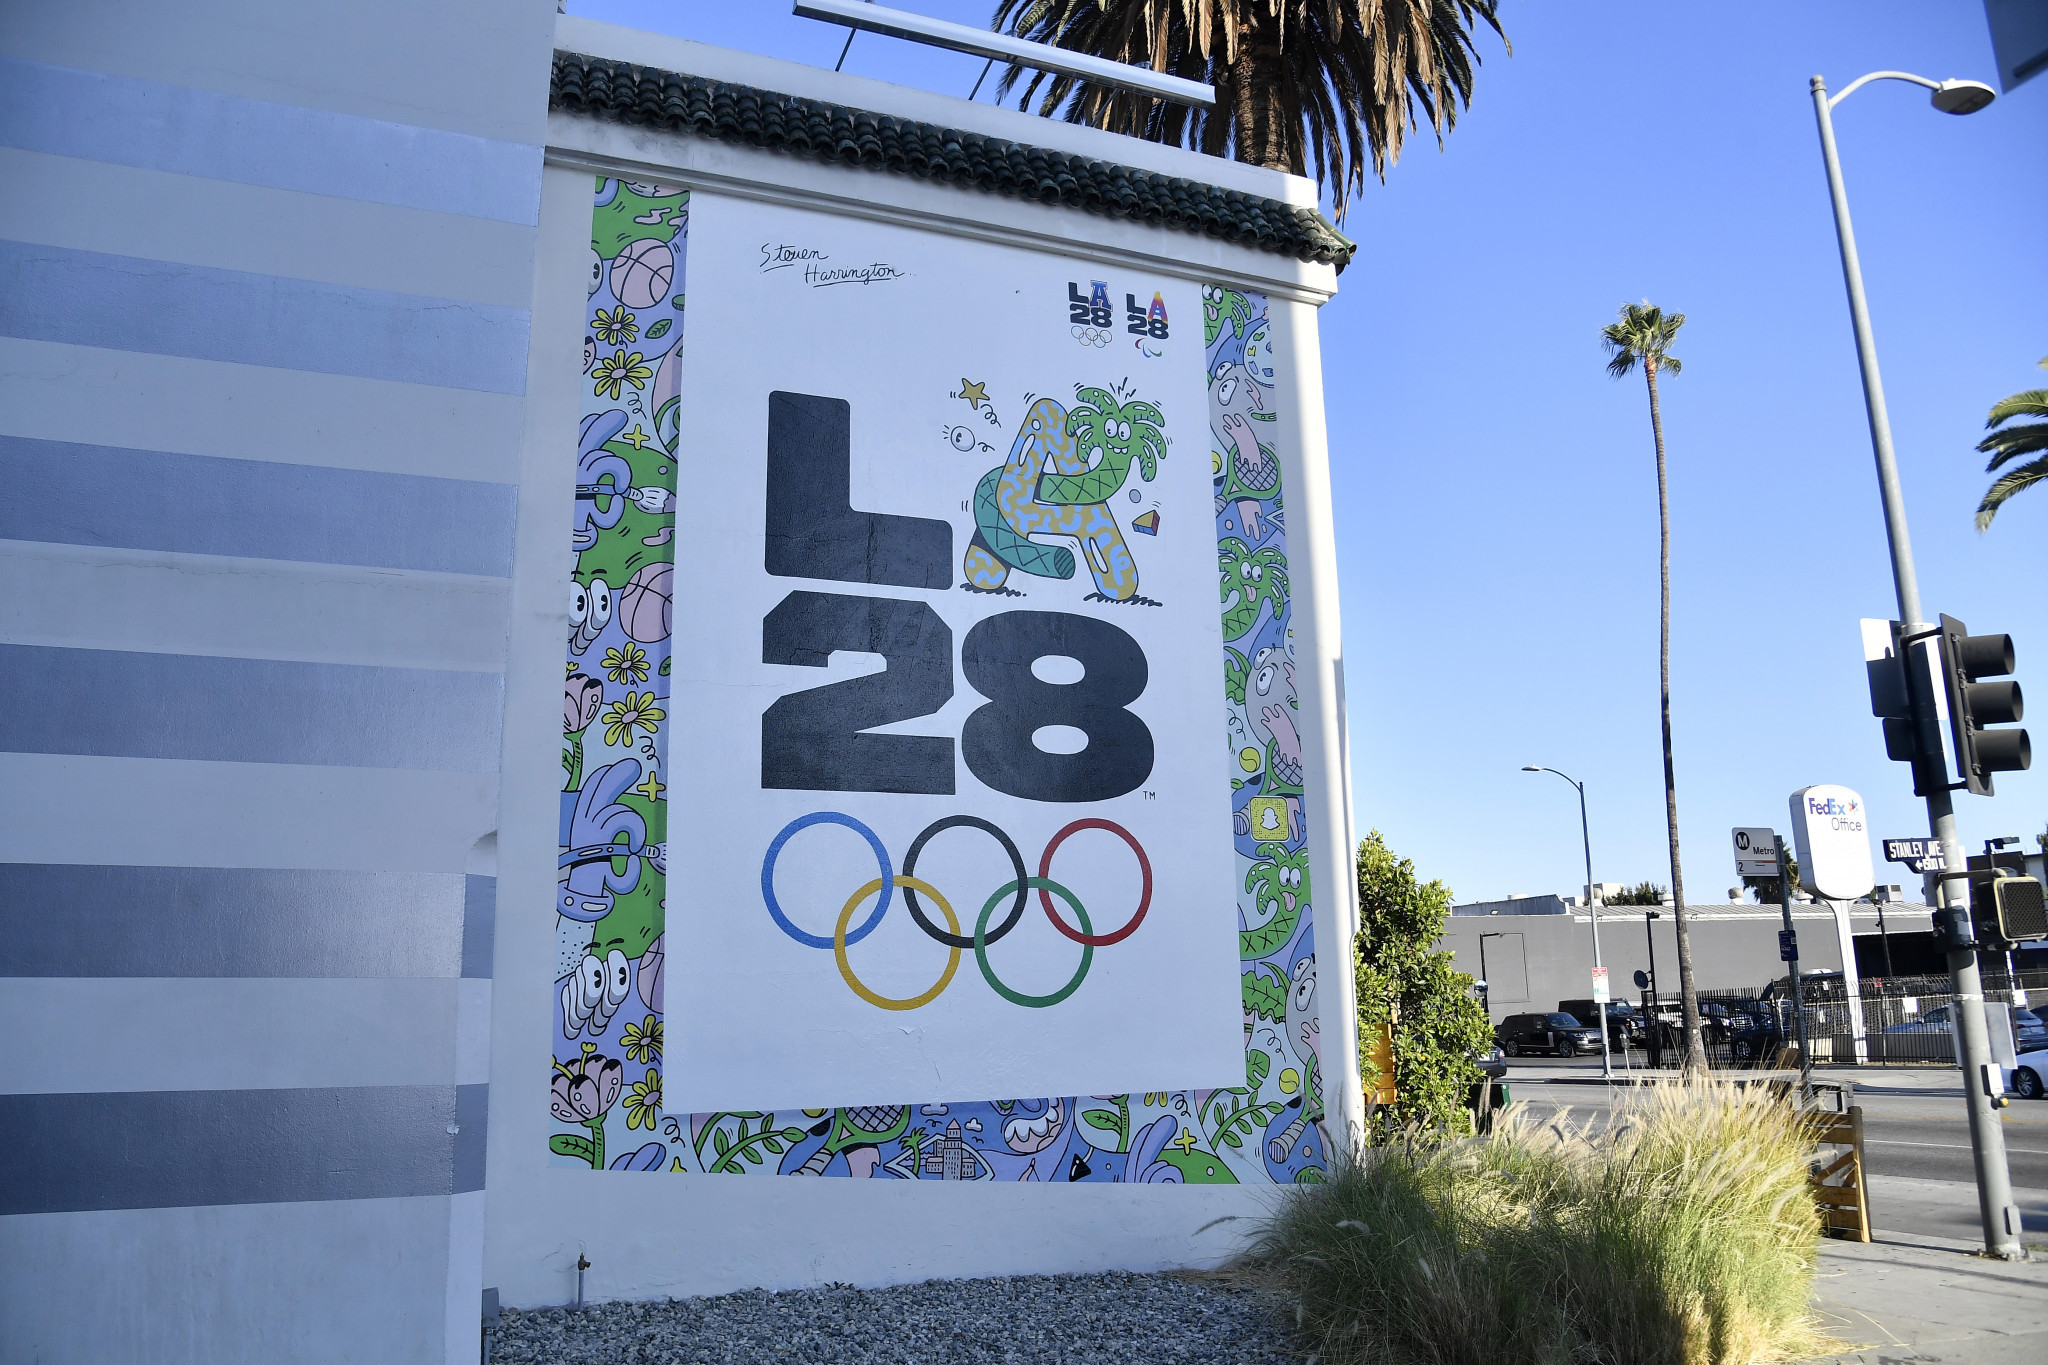 LA28 chief athlete officer Evans says sharing "power of sport" can be Games' greatest legacy